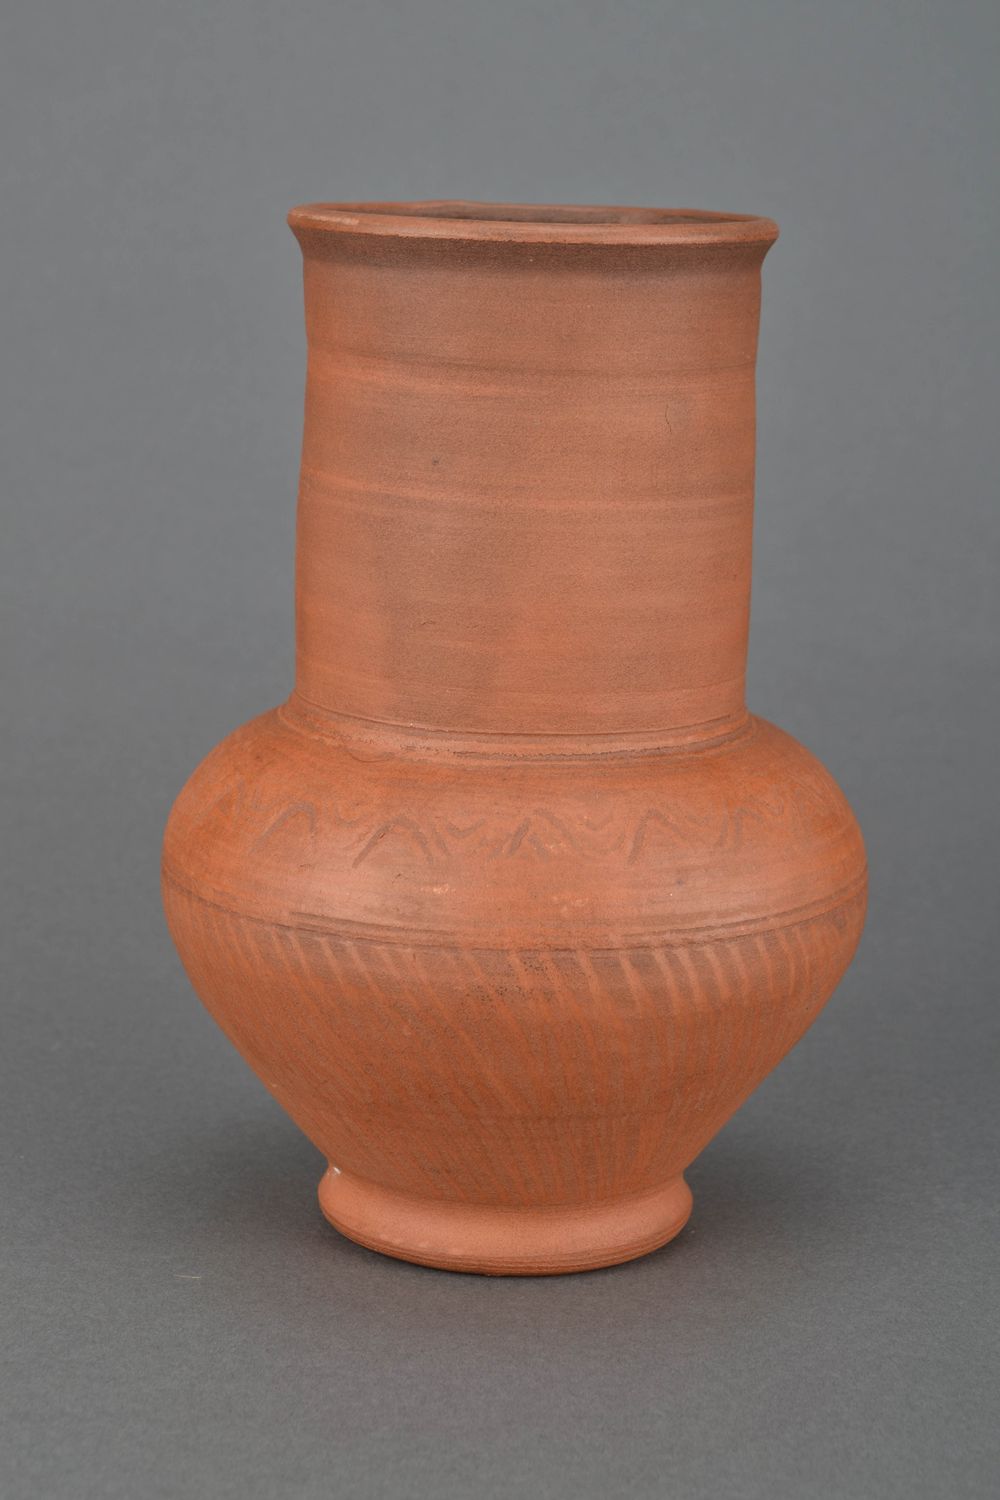 66 oz handmade ceramic terracotta water pitcher without handle 2 lb photo 1